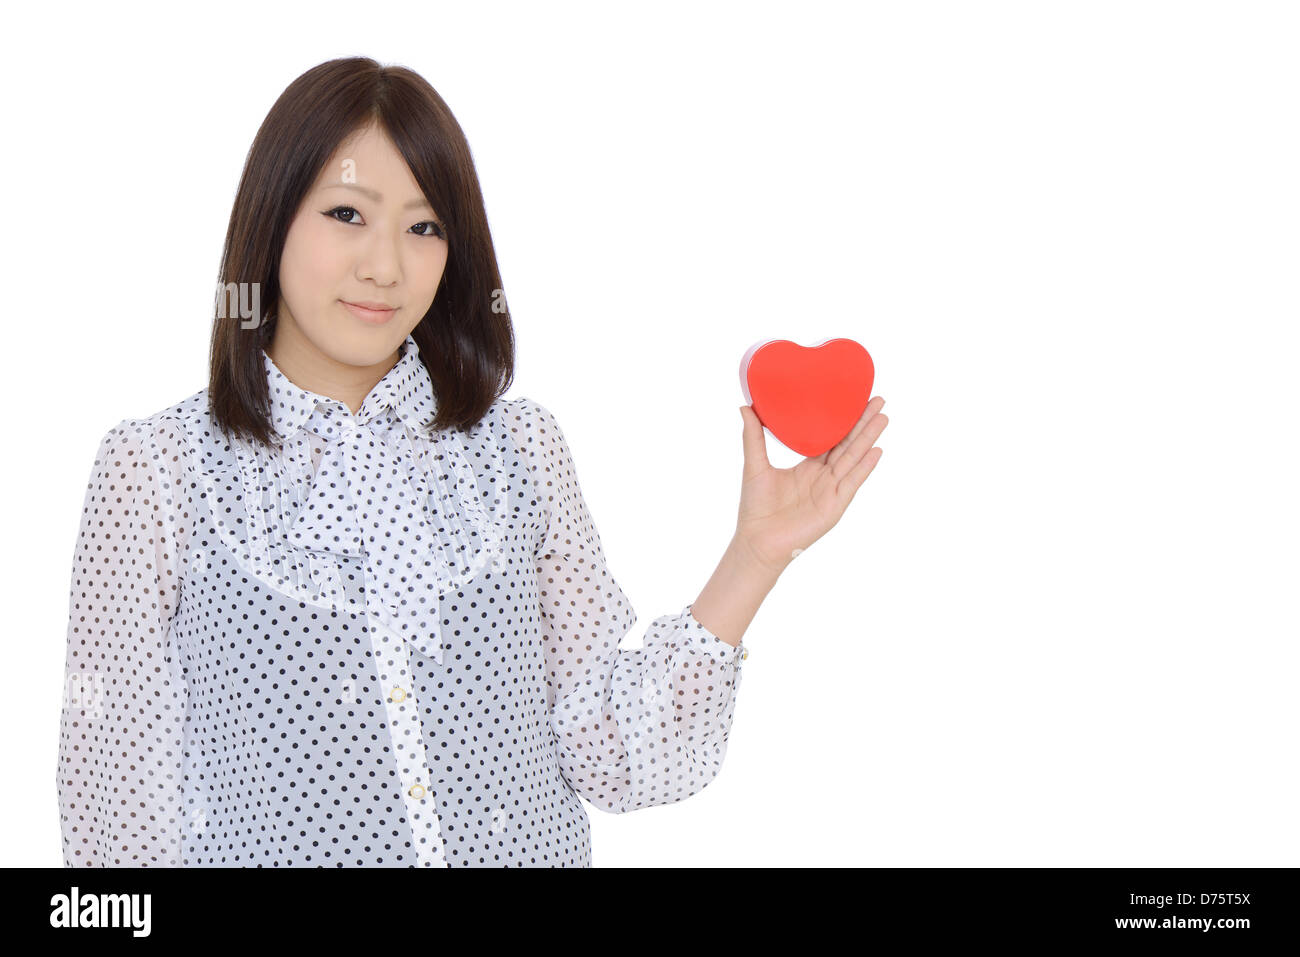 Young asian woman holding a red heart Stock Photo